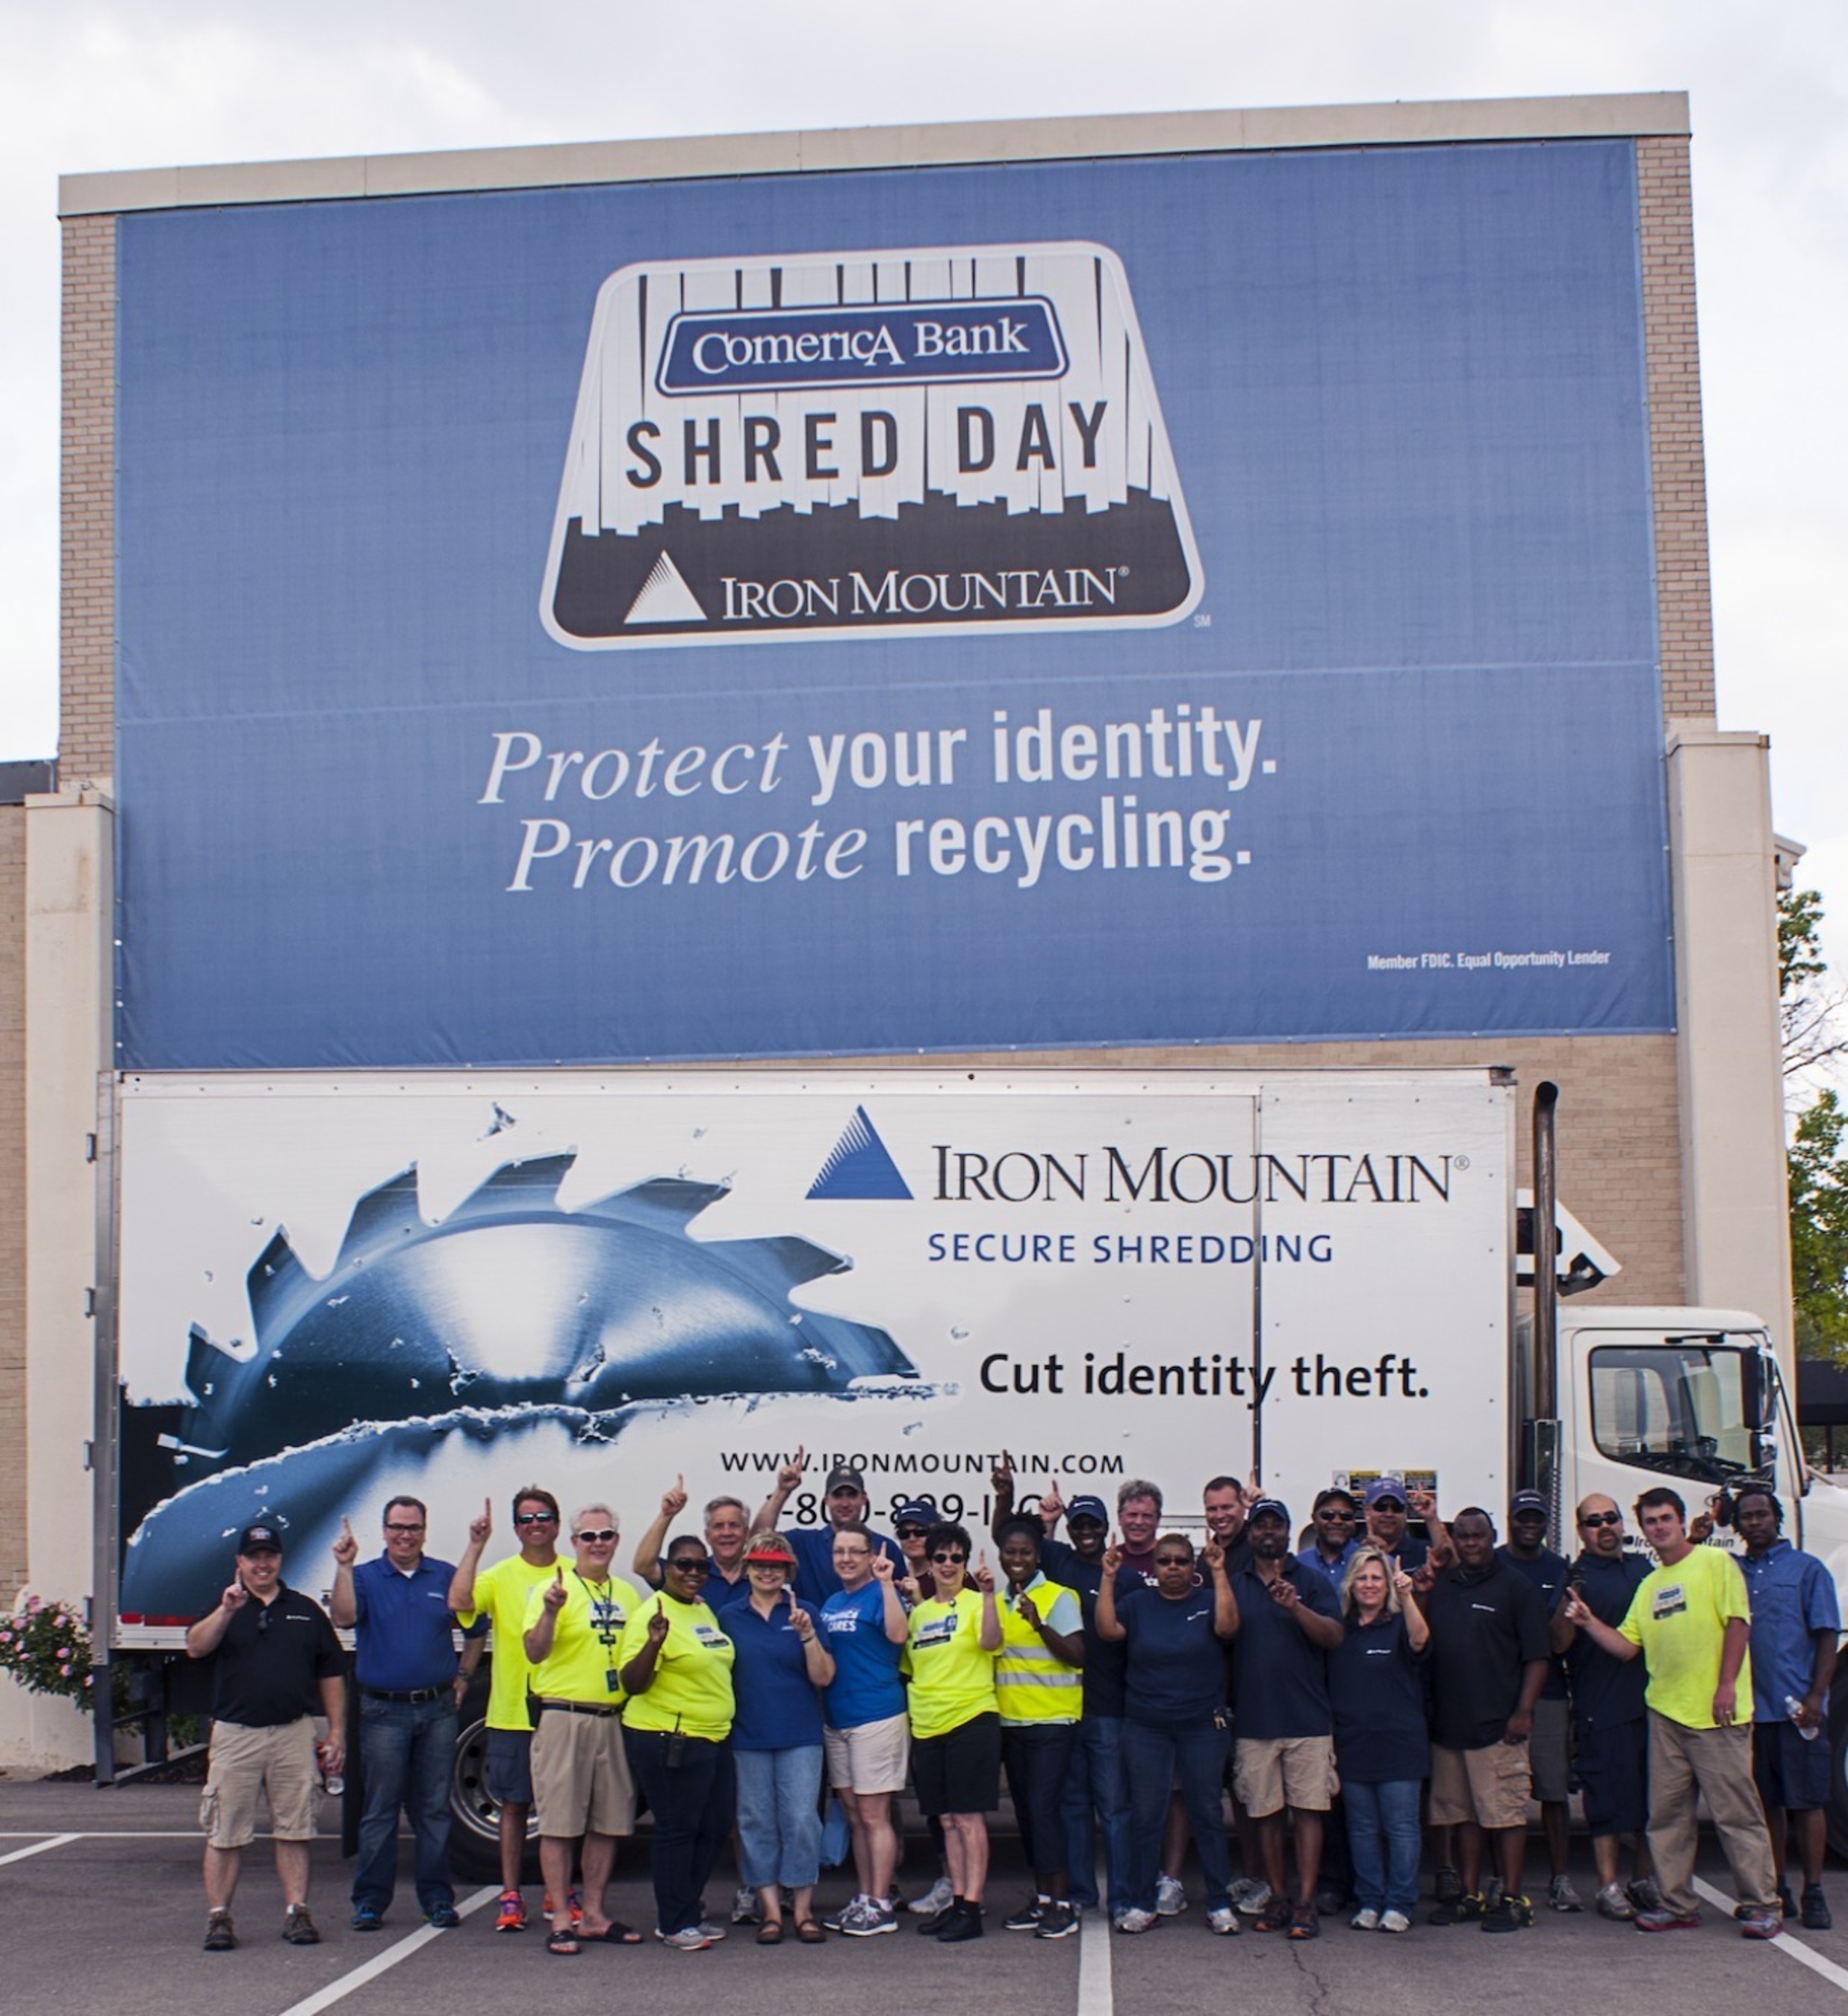 Representatives from Comerica Bank and Iron Mountain pose for a group shot upon hearing news of earning a Guinness World Record(R) achievement for "The Most Paper Collected in a 24-Hour Period" at the fourth annual Shred Day DFW in Dallas, Texas on Saturday, April 26, 2014. A total of 401,925 pounds of paper was collected and recycled, which surpassed the previous world record by more than 63 tons.  (PRNewsFoto/Comerica Bank/Iron Mountain)